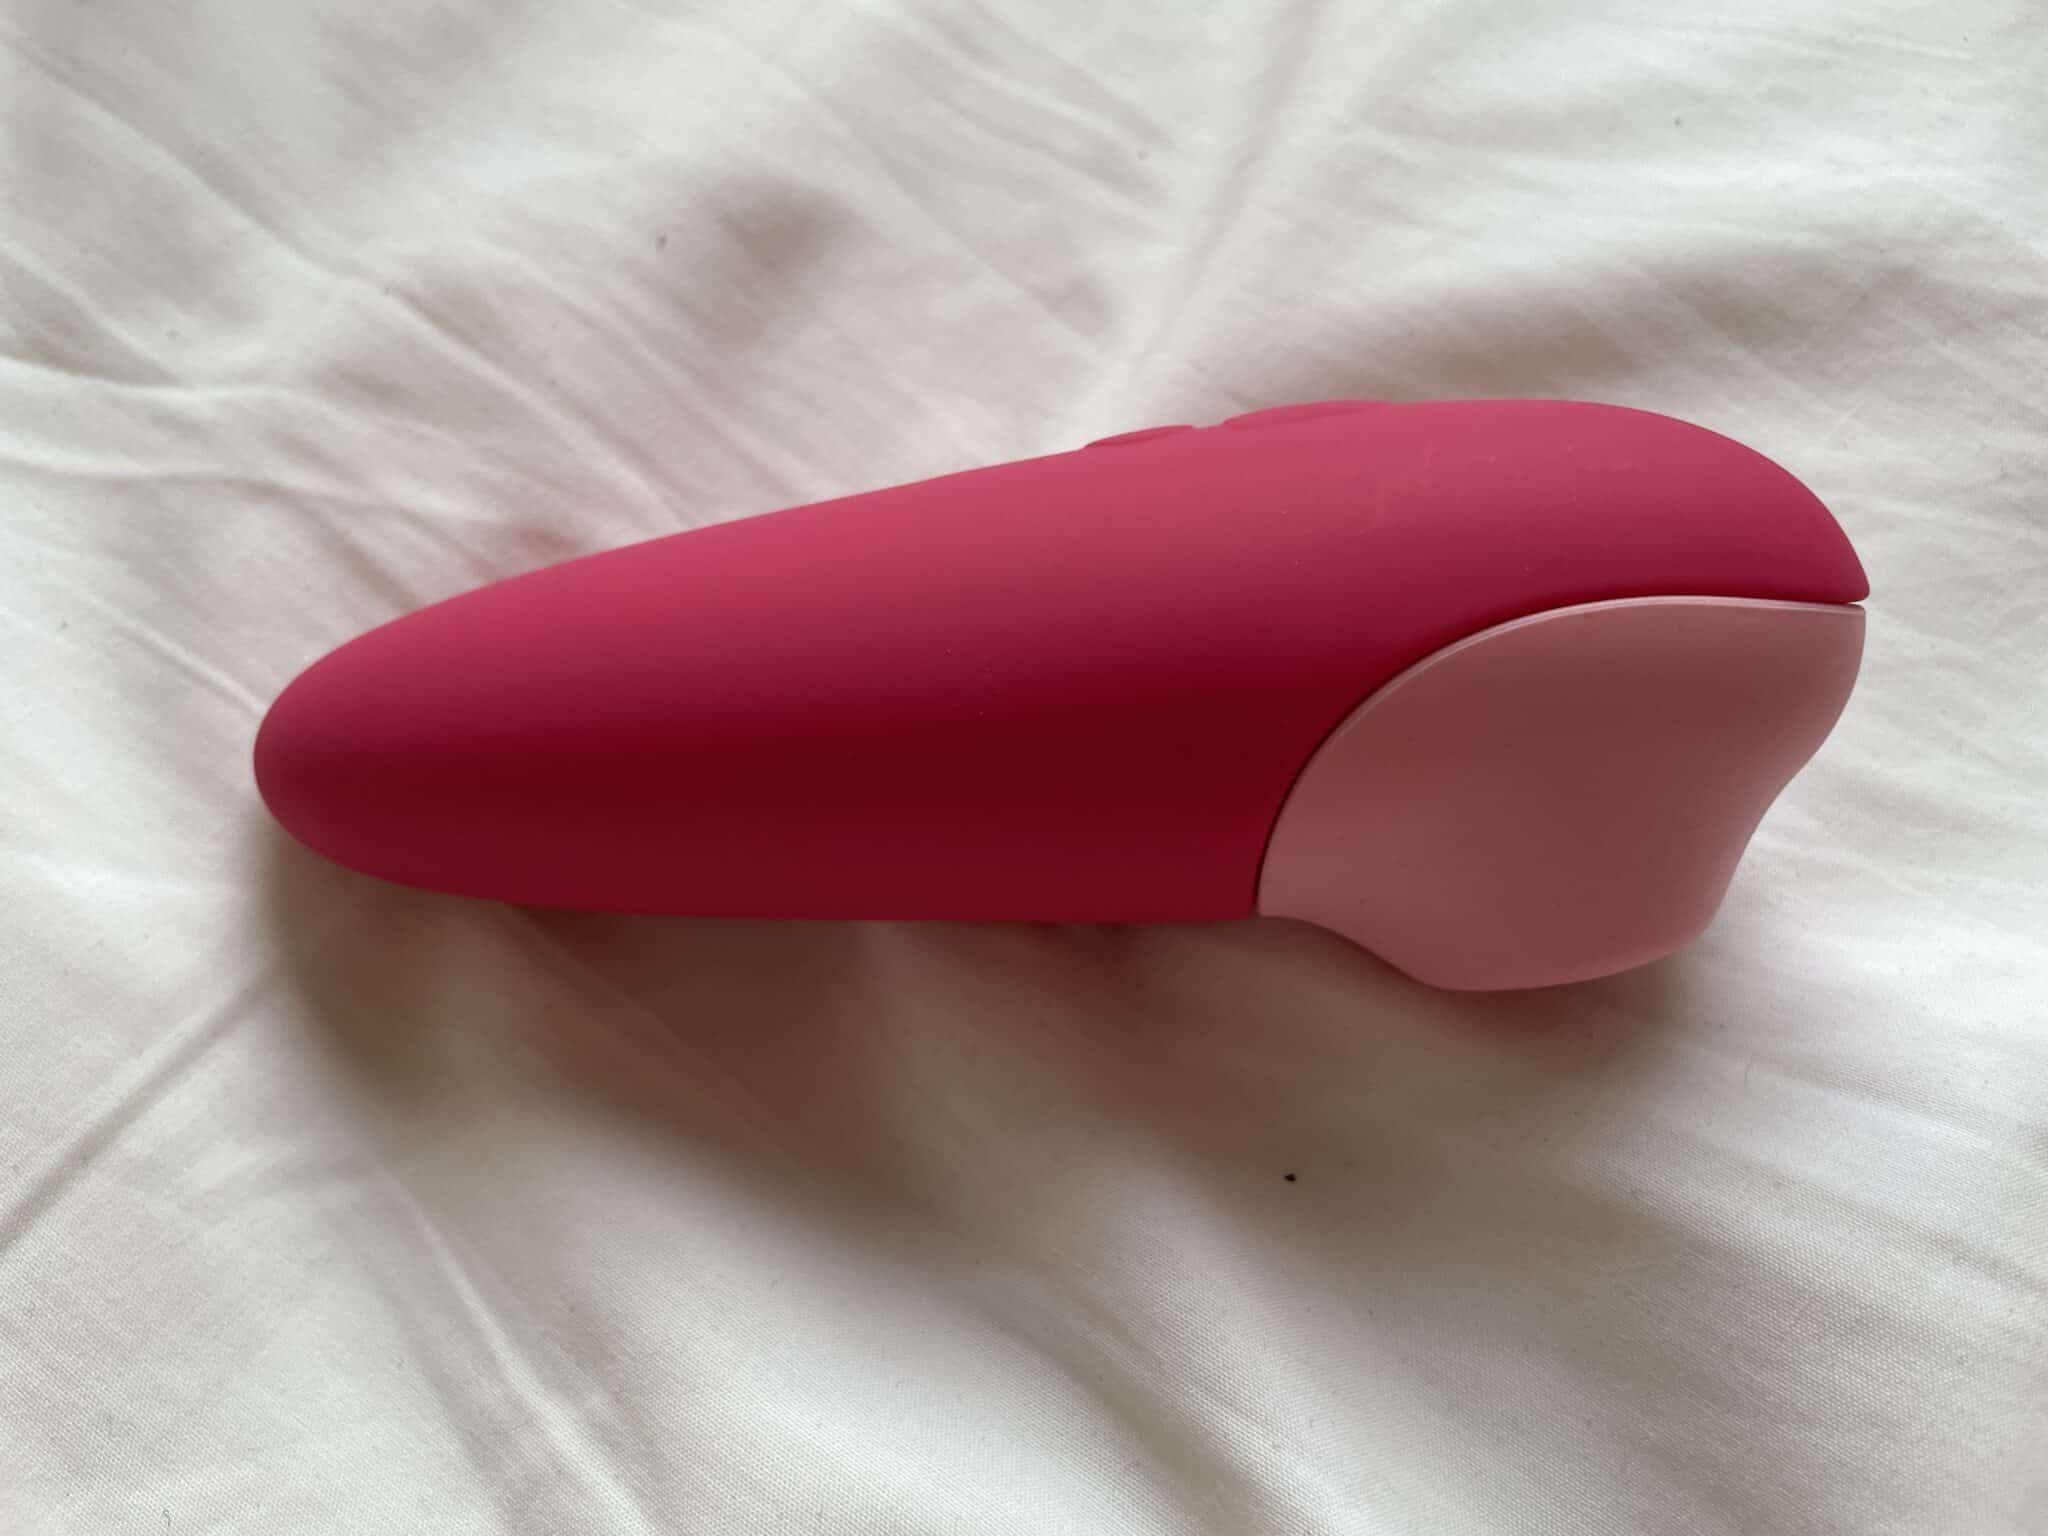 ROMP Shine X Clitoral Suction Stimulator The Price Point of ROMP Shine X Clitoral Suction Stimulator: A Review